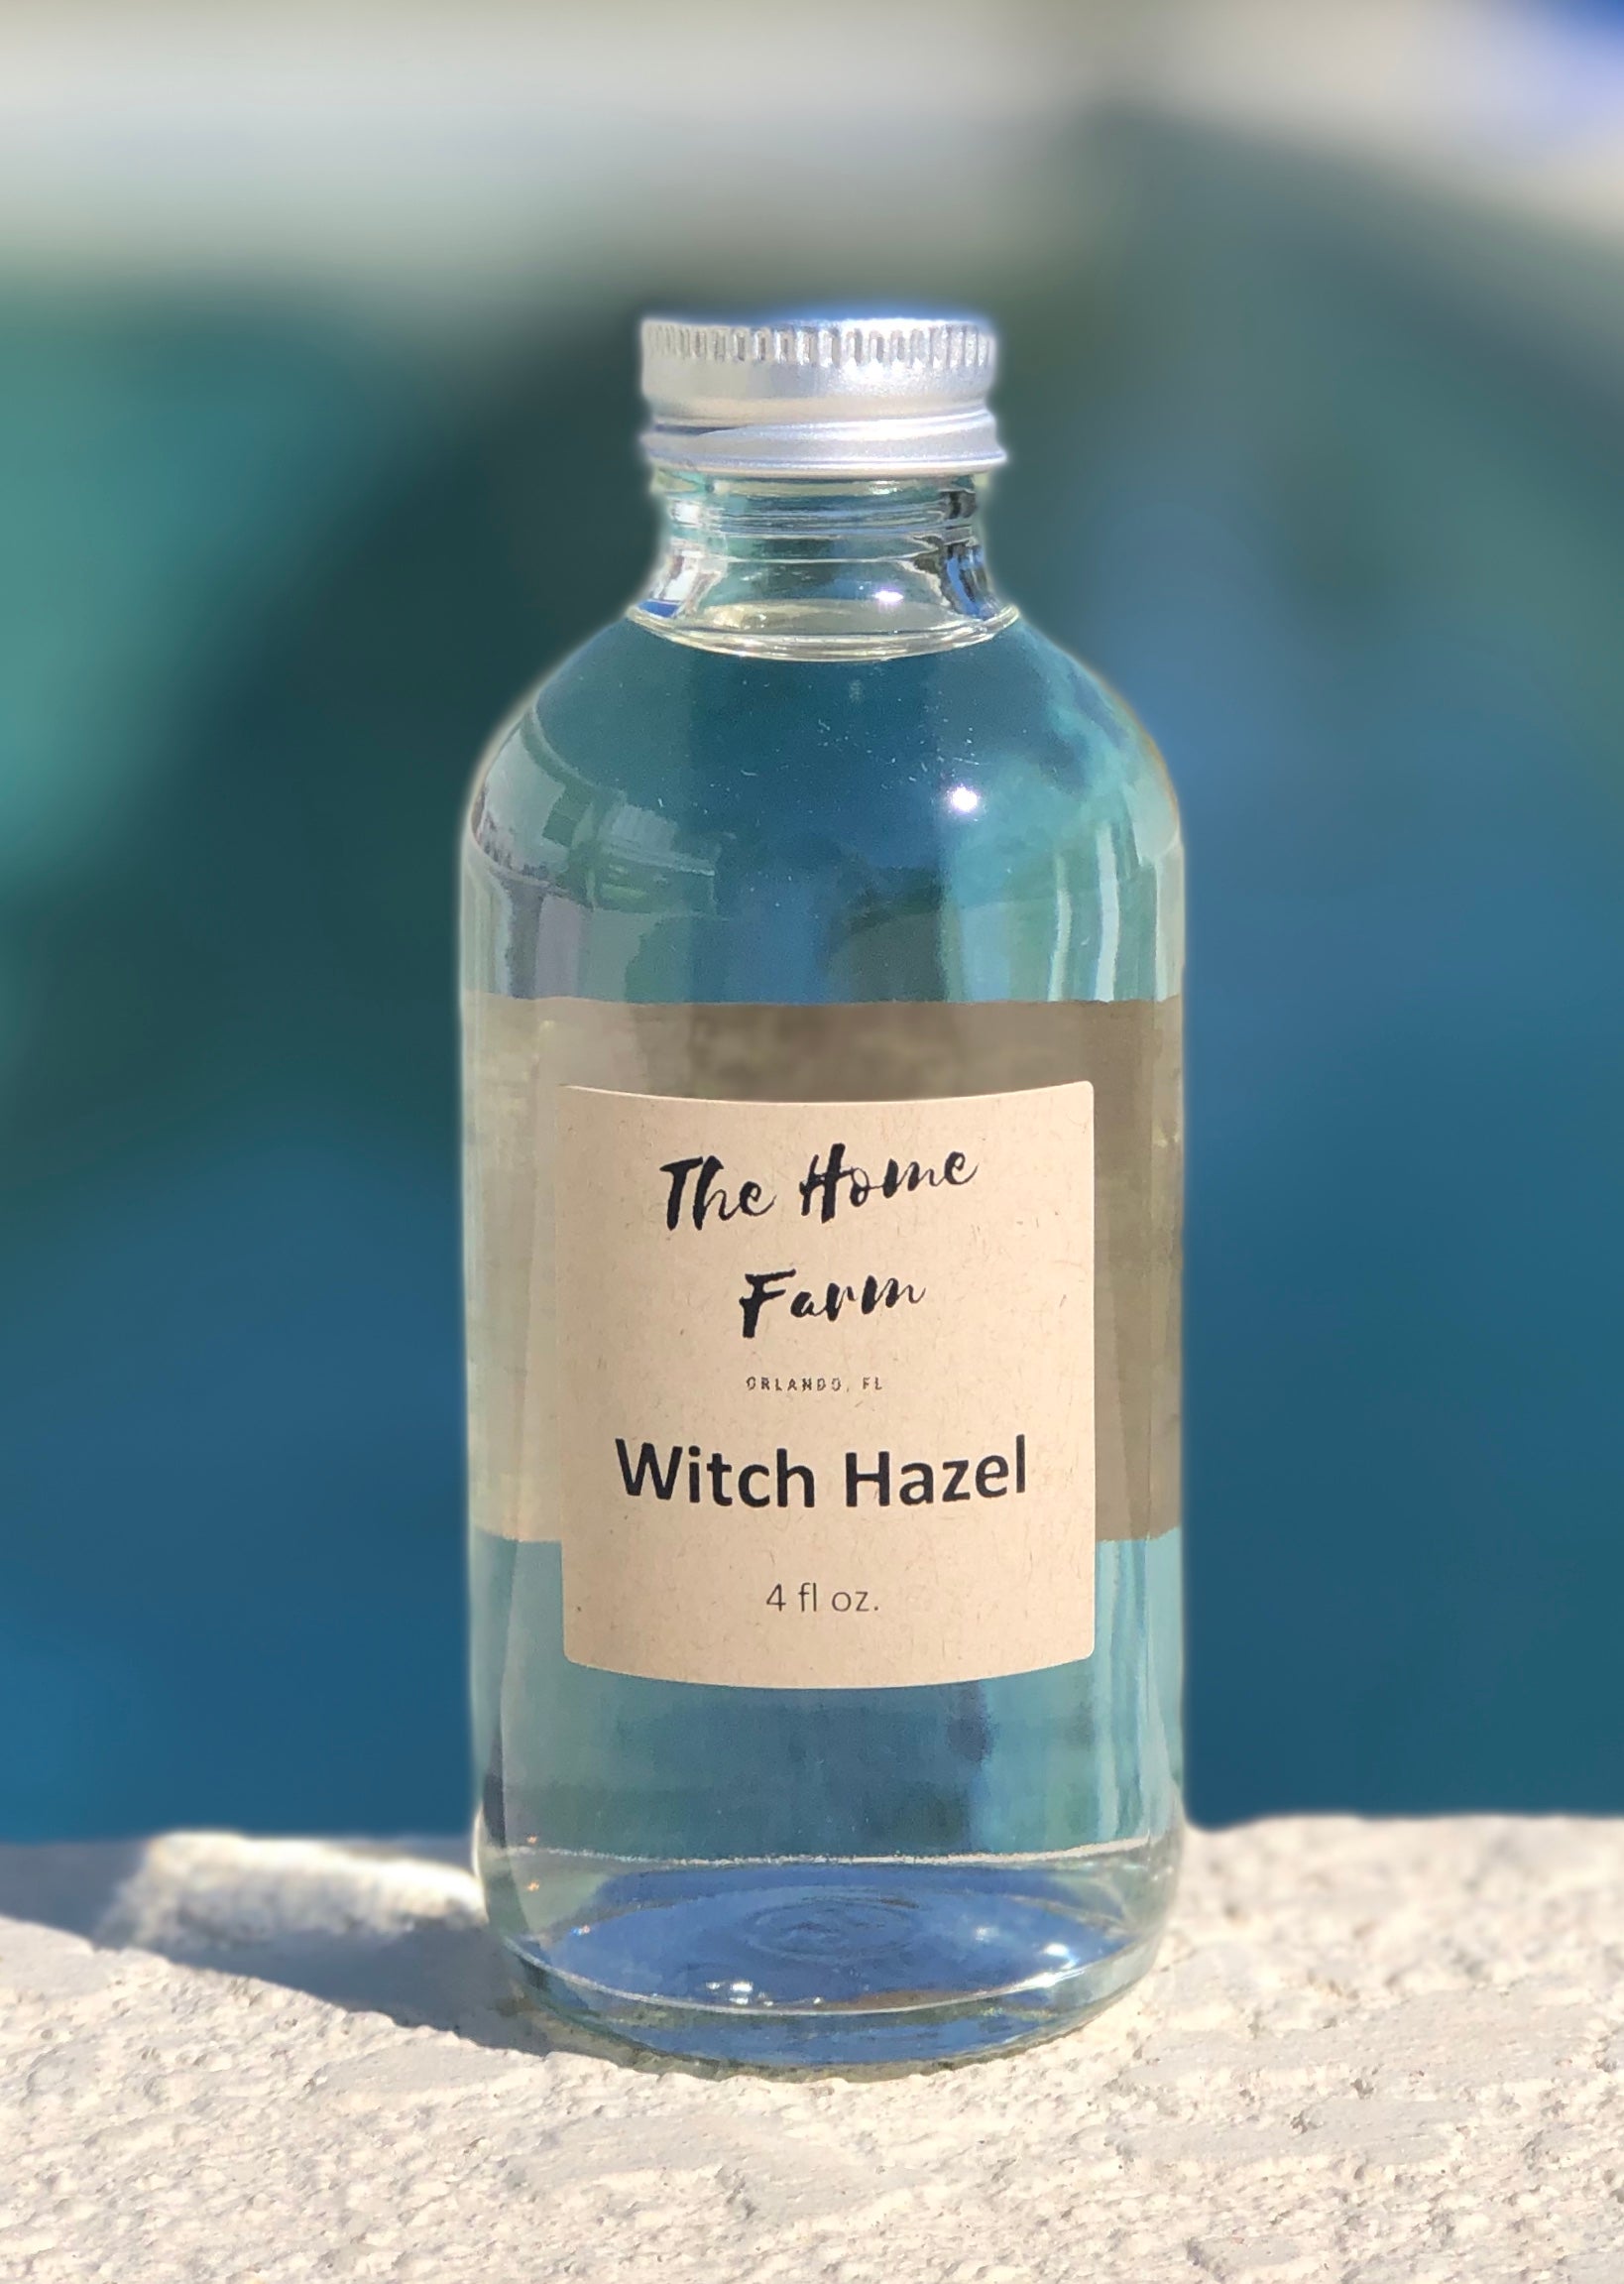 Organic Witch Hazel Makeup Remover